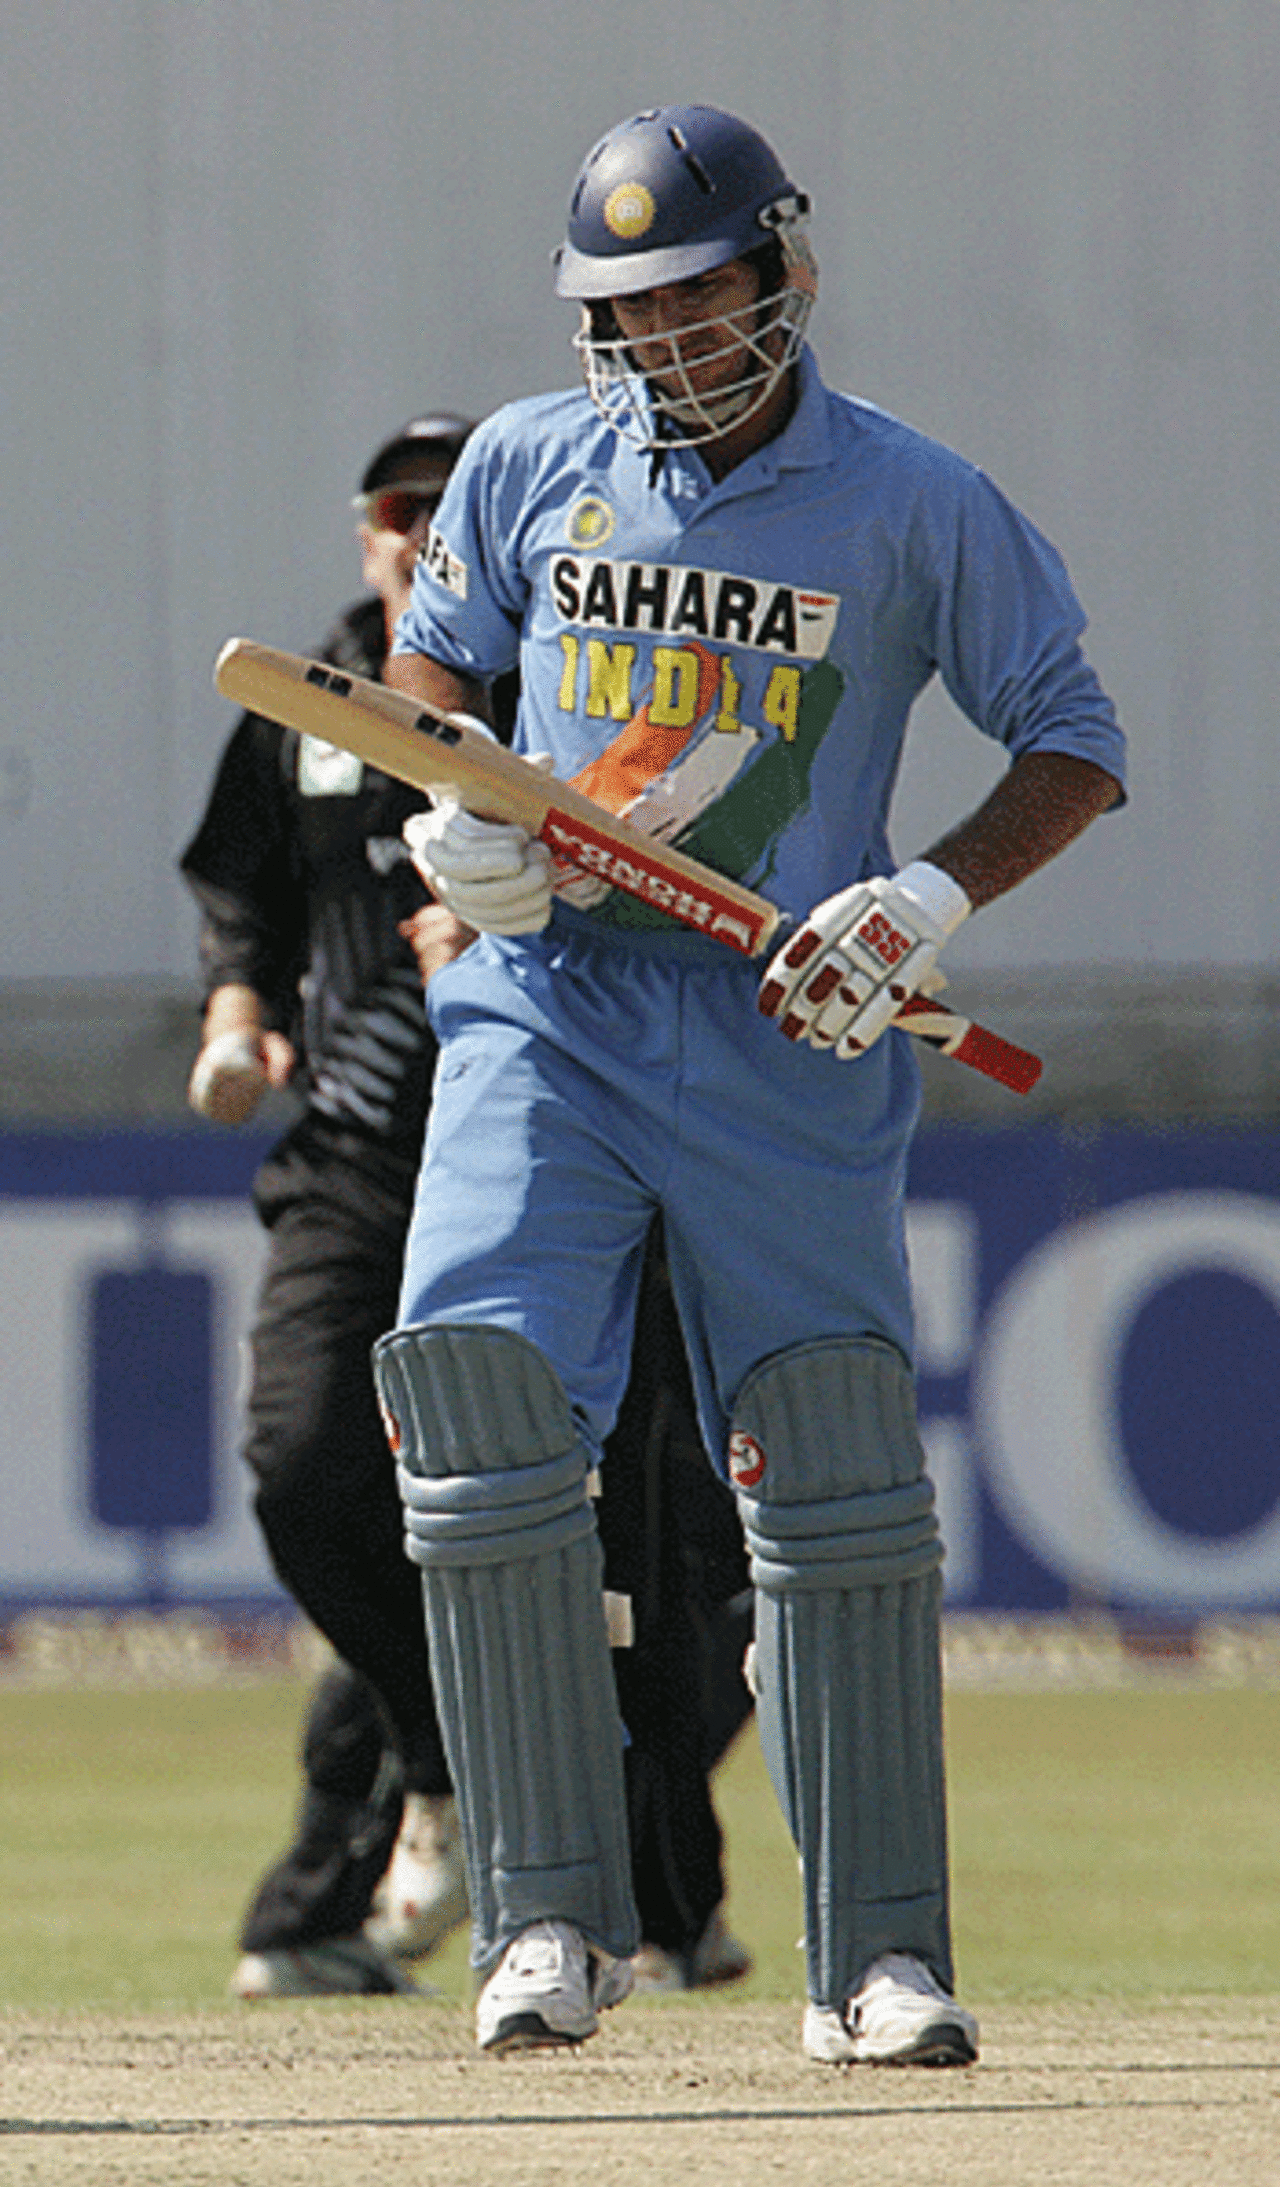 Yuvraj Singh pauses to reflect after being caught behind off Andre Adams, India v New Zealand, Bulawayo, August 26, 2005